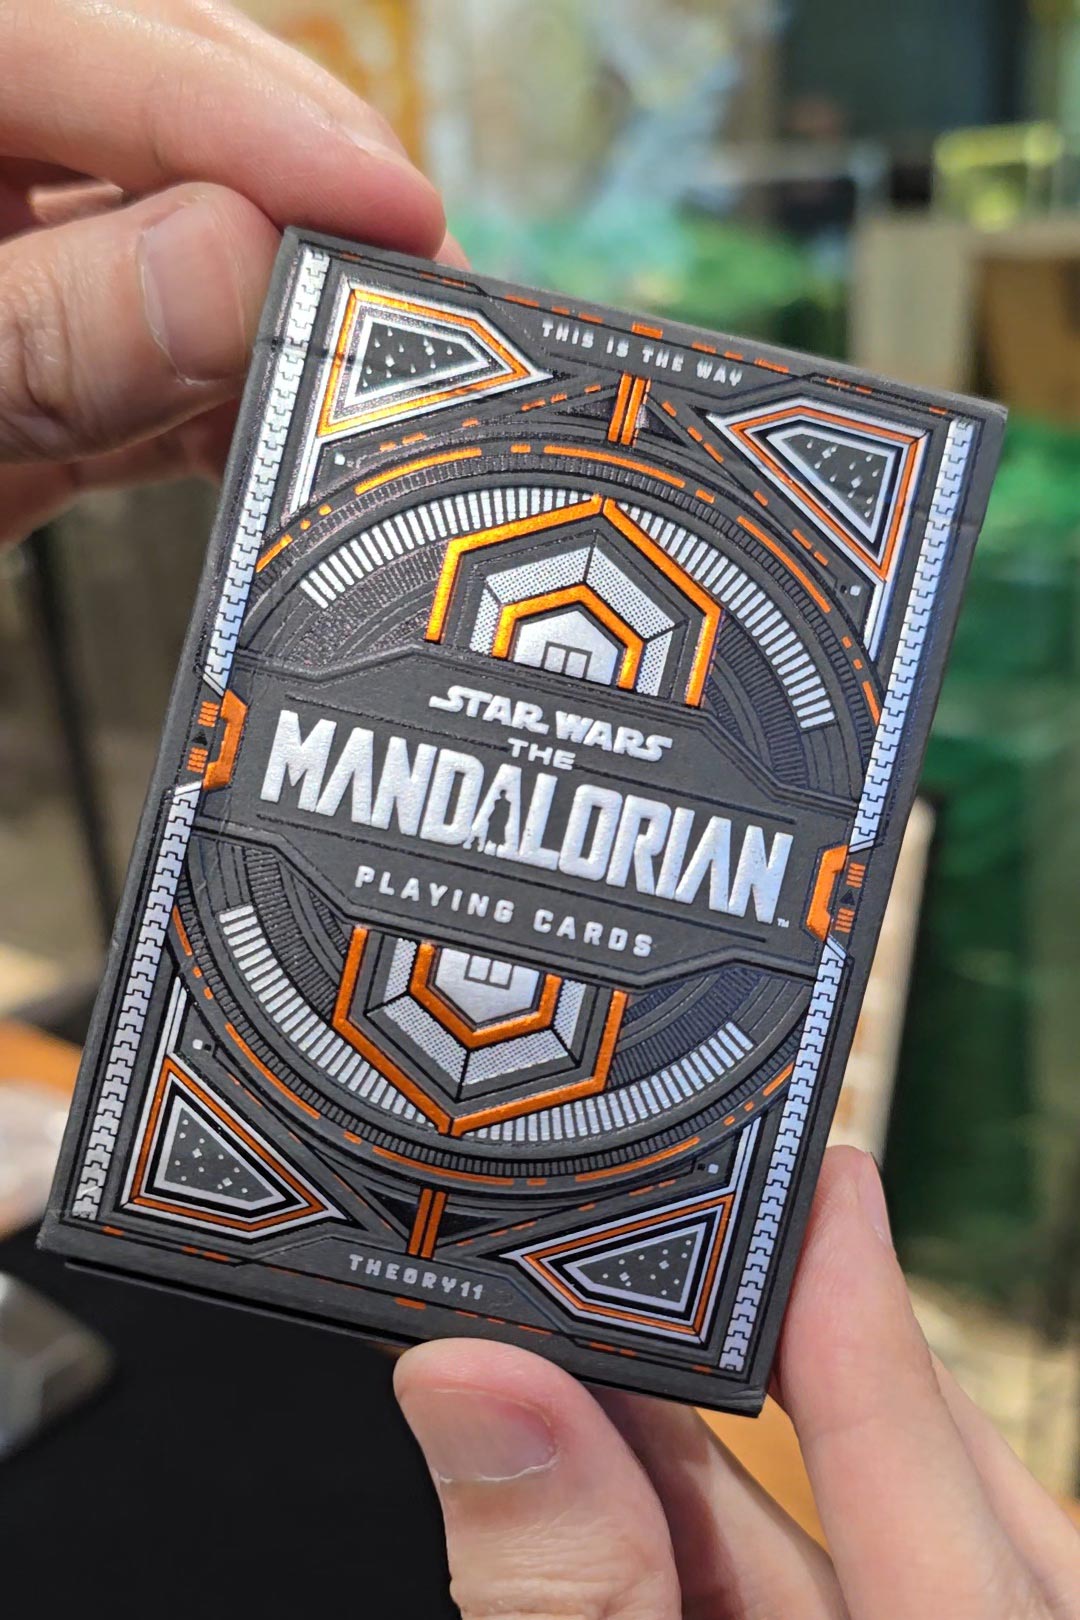 Opening The Mandalorian v2 Playing Cards!